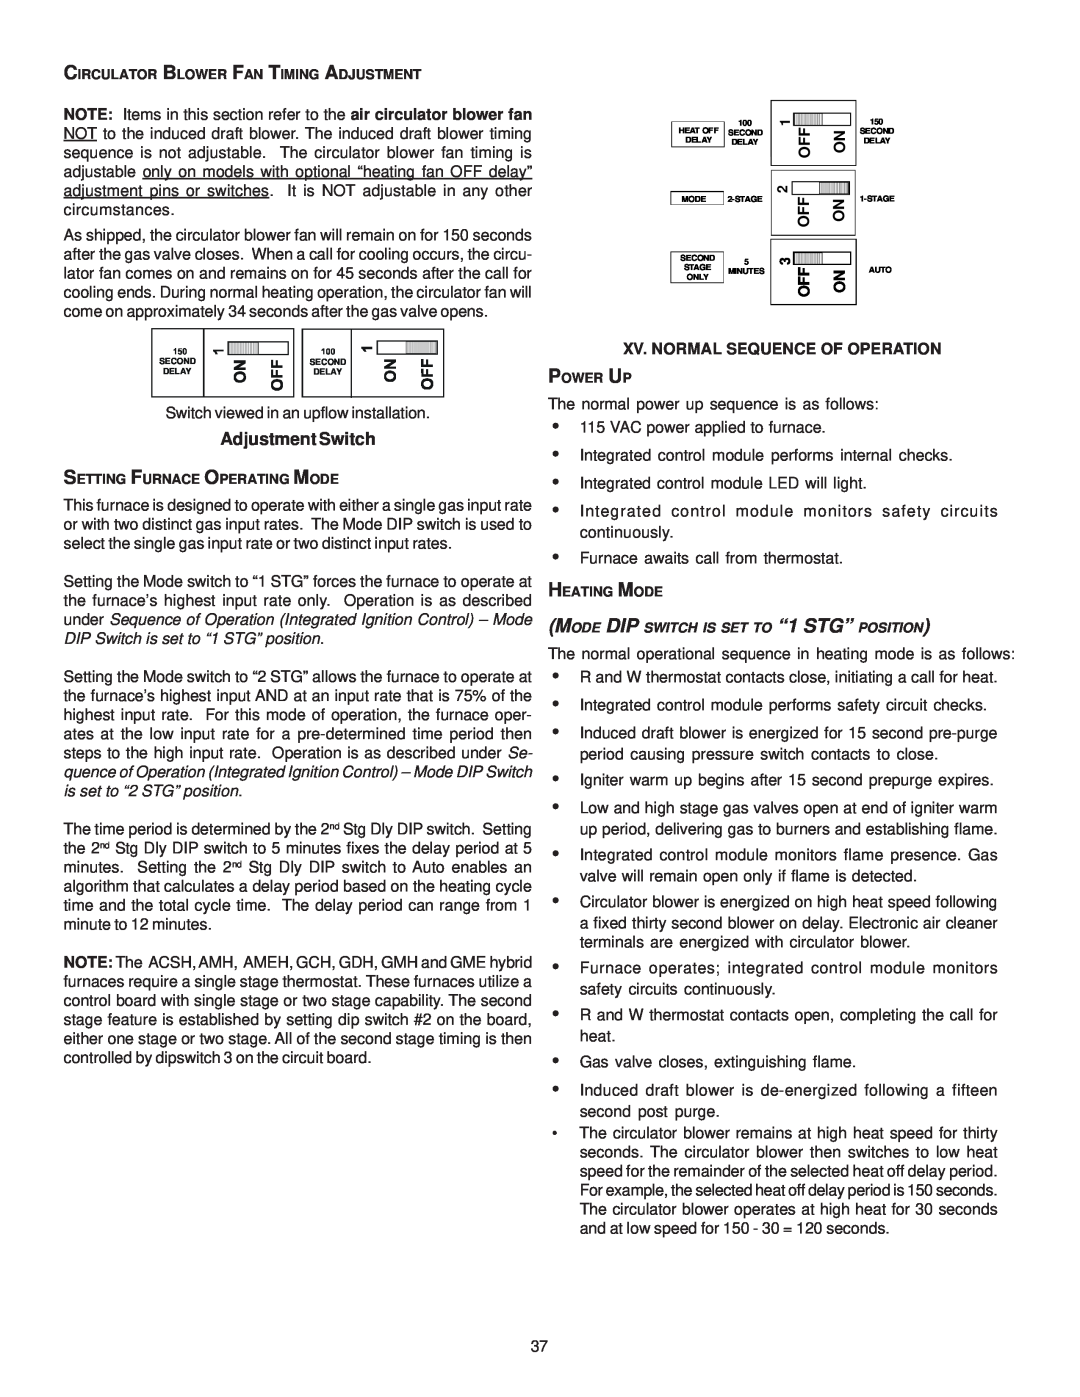 Goodman Mfg GAS-FIRED WARM AIR FURNACE installation instructions Adjustment Switch, Xv. Normal Sequence Of Operation 